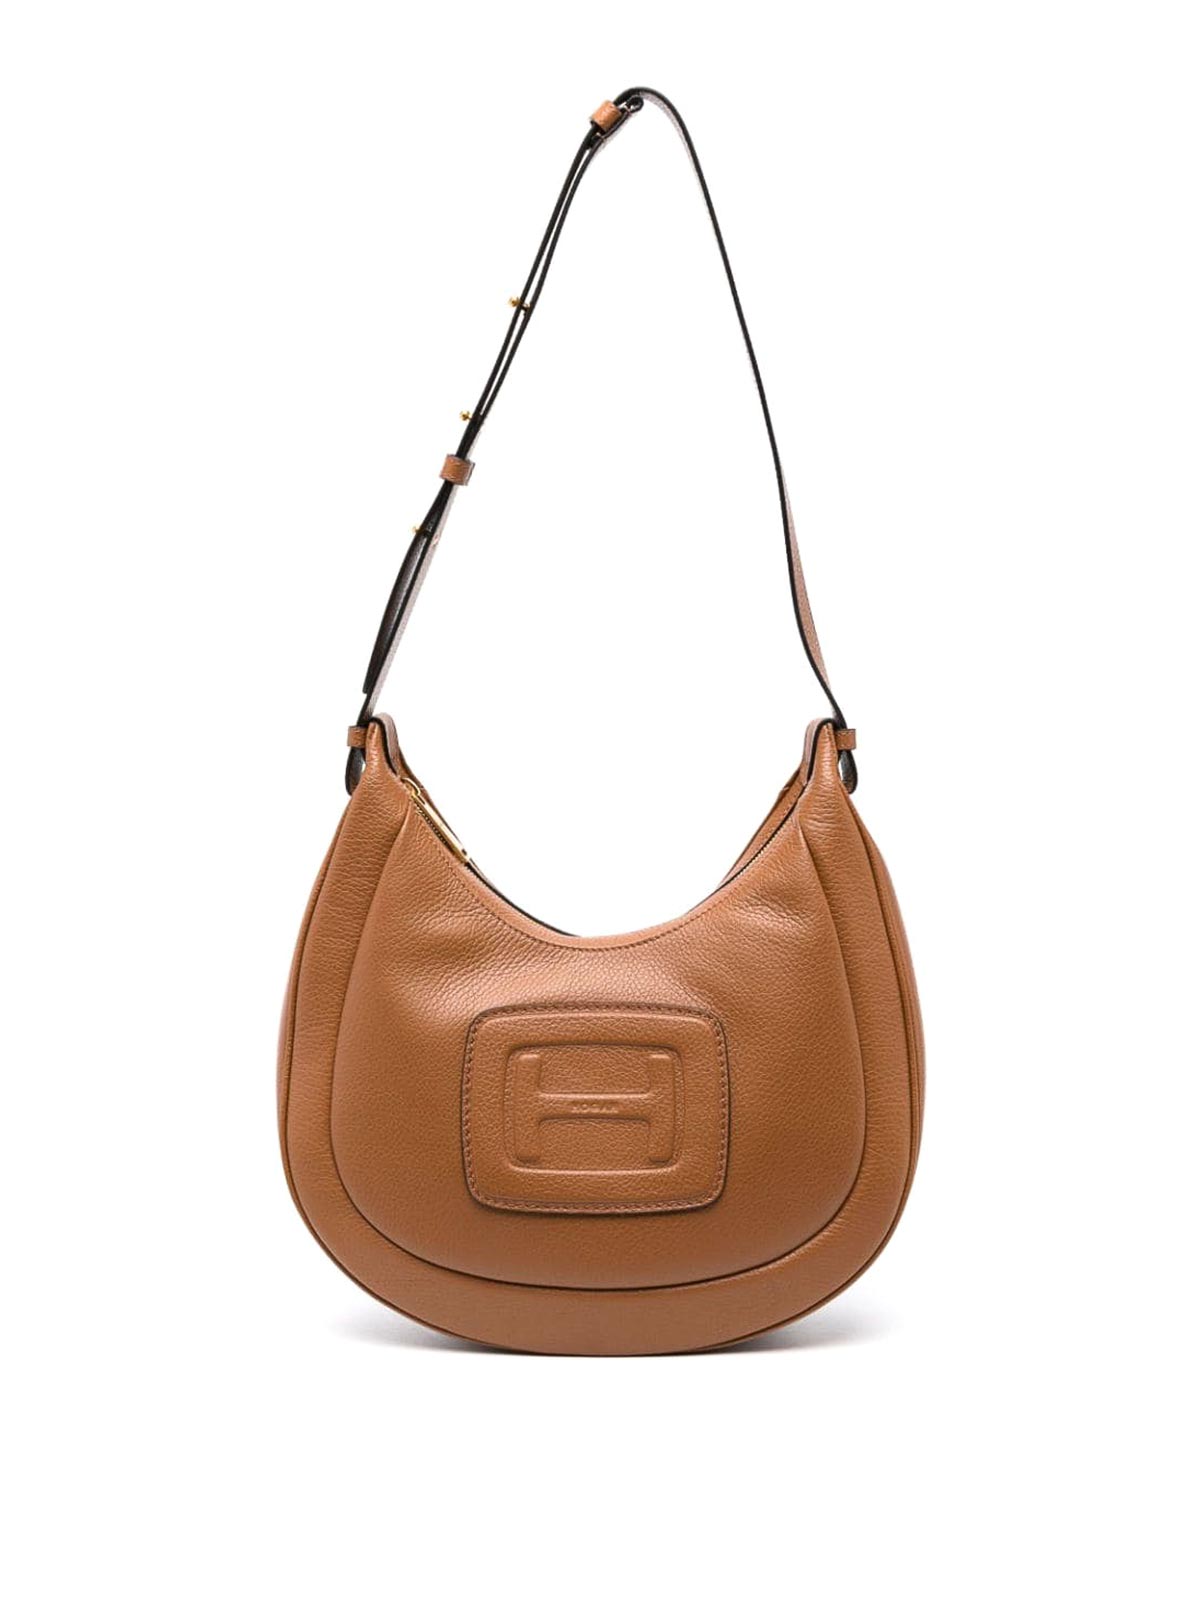 Hogan - H bag Shopping - Cognac colored shopping bag in grained leather  with flap with magnetic logo H, for women